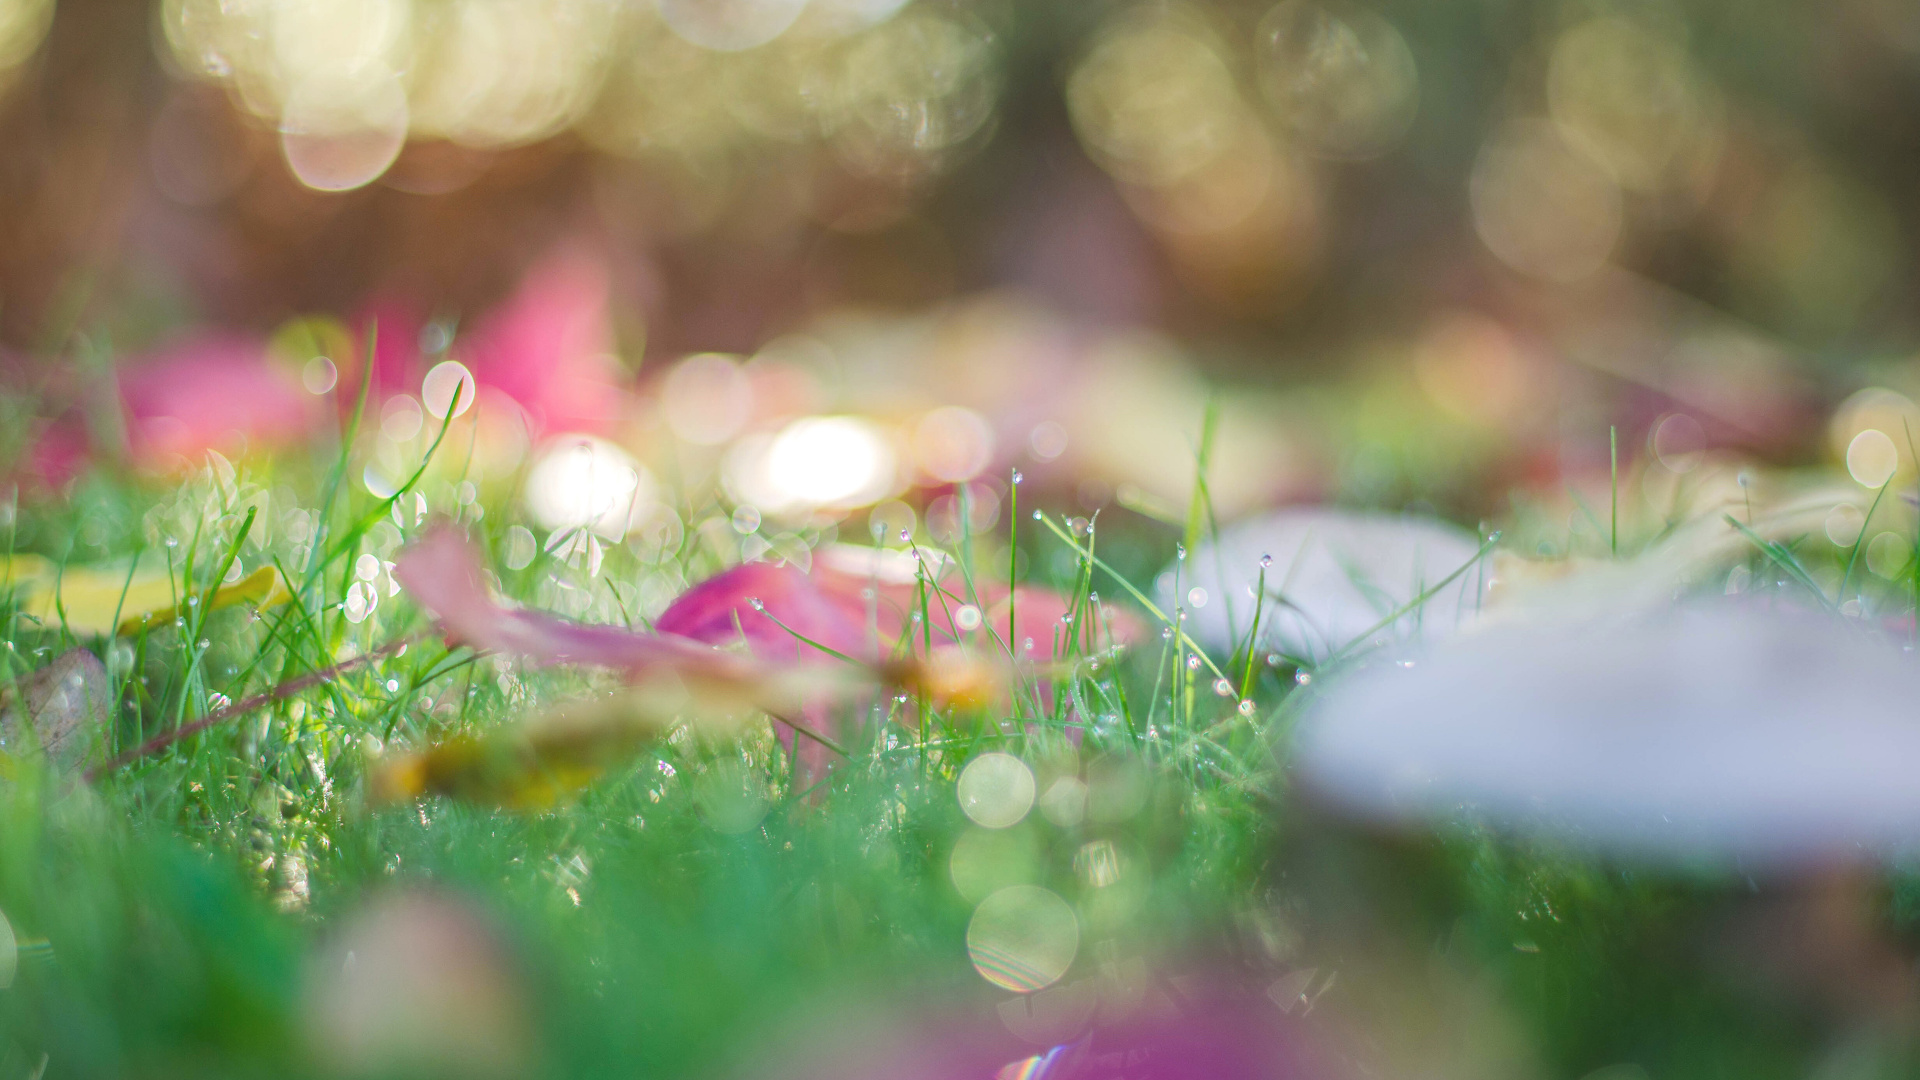 Water Droplets on Green Grass. Wallpaper in 1920x1080 Resolution